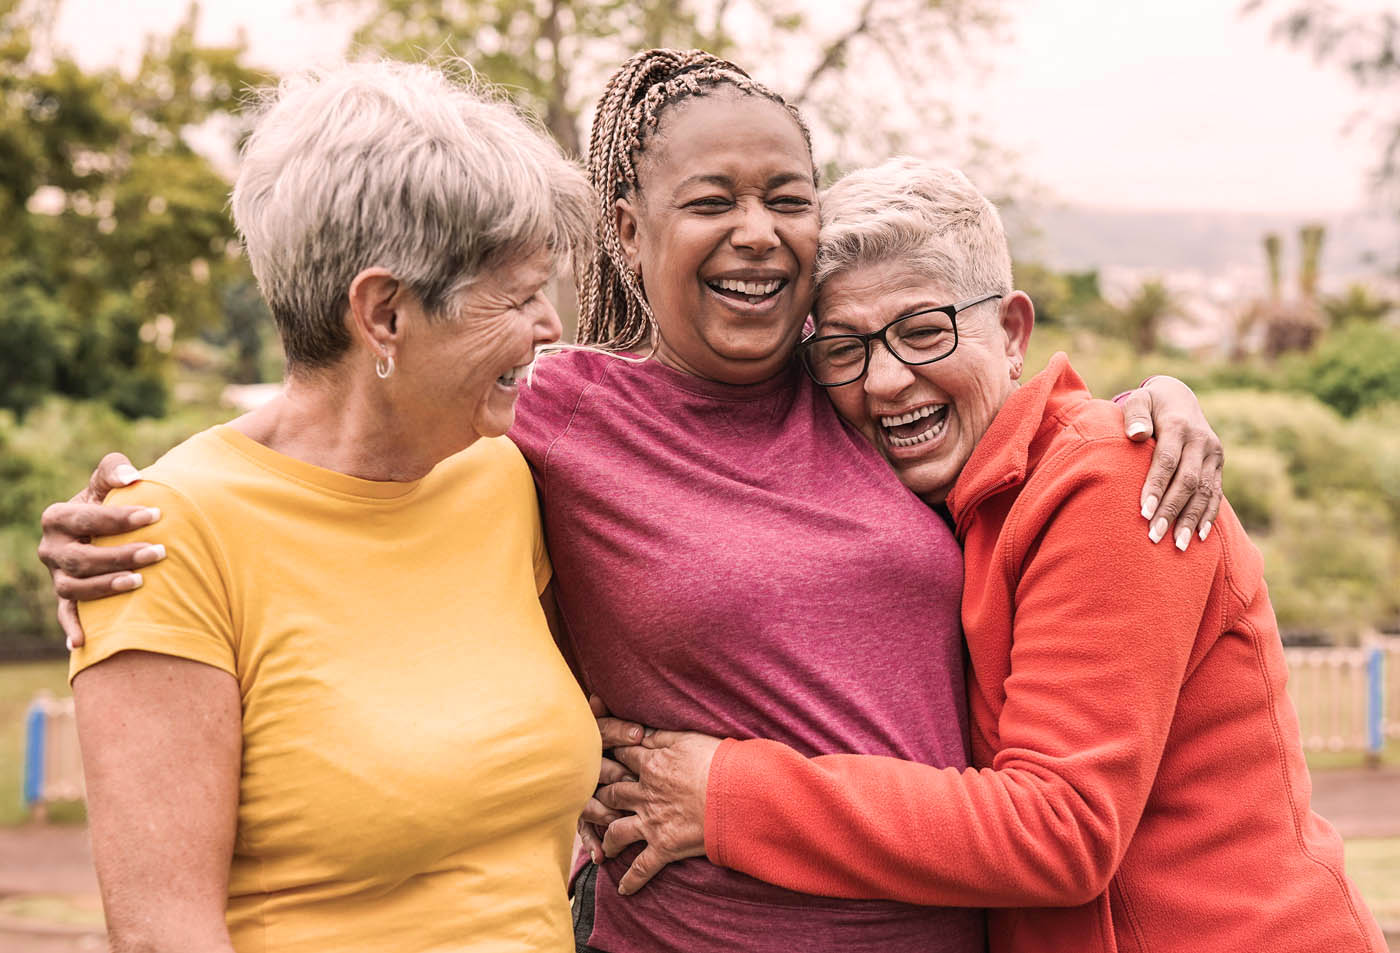 A group of elderly women laughing and hugging each other - discover Scottsdale multiple sclerosis pain treatment today.